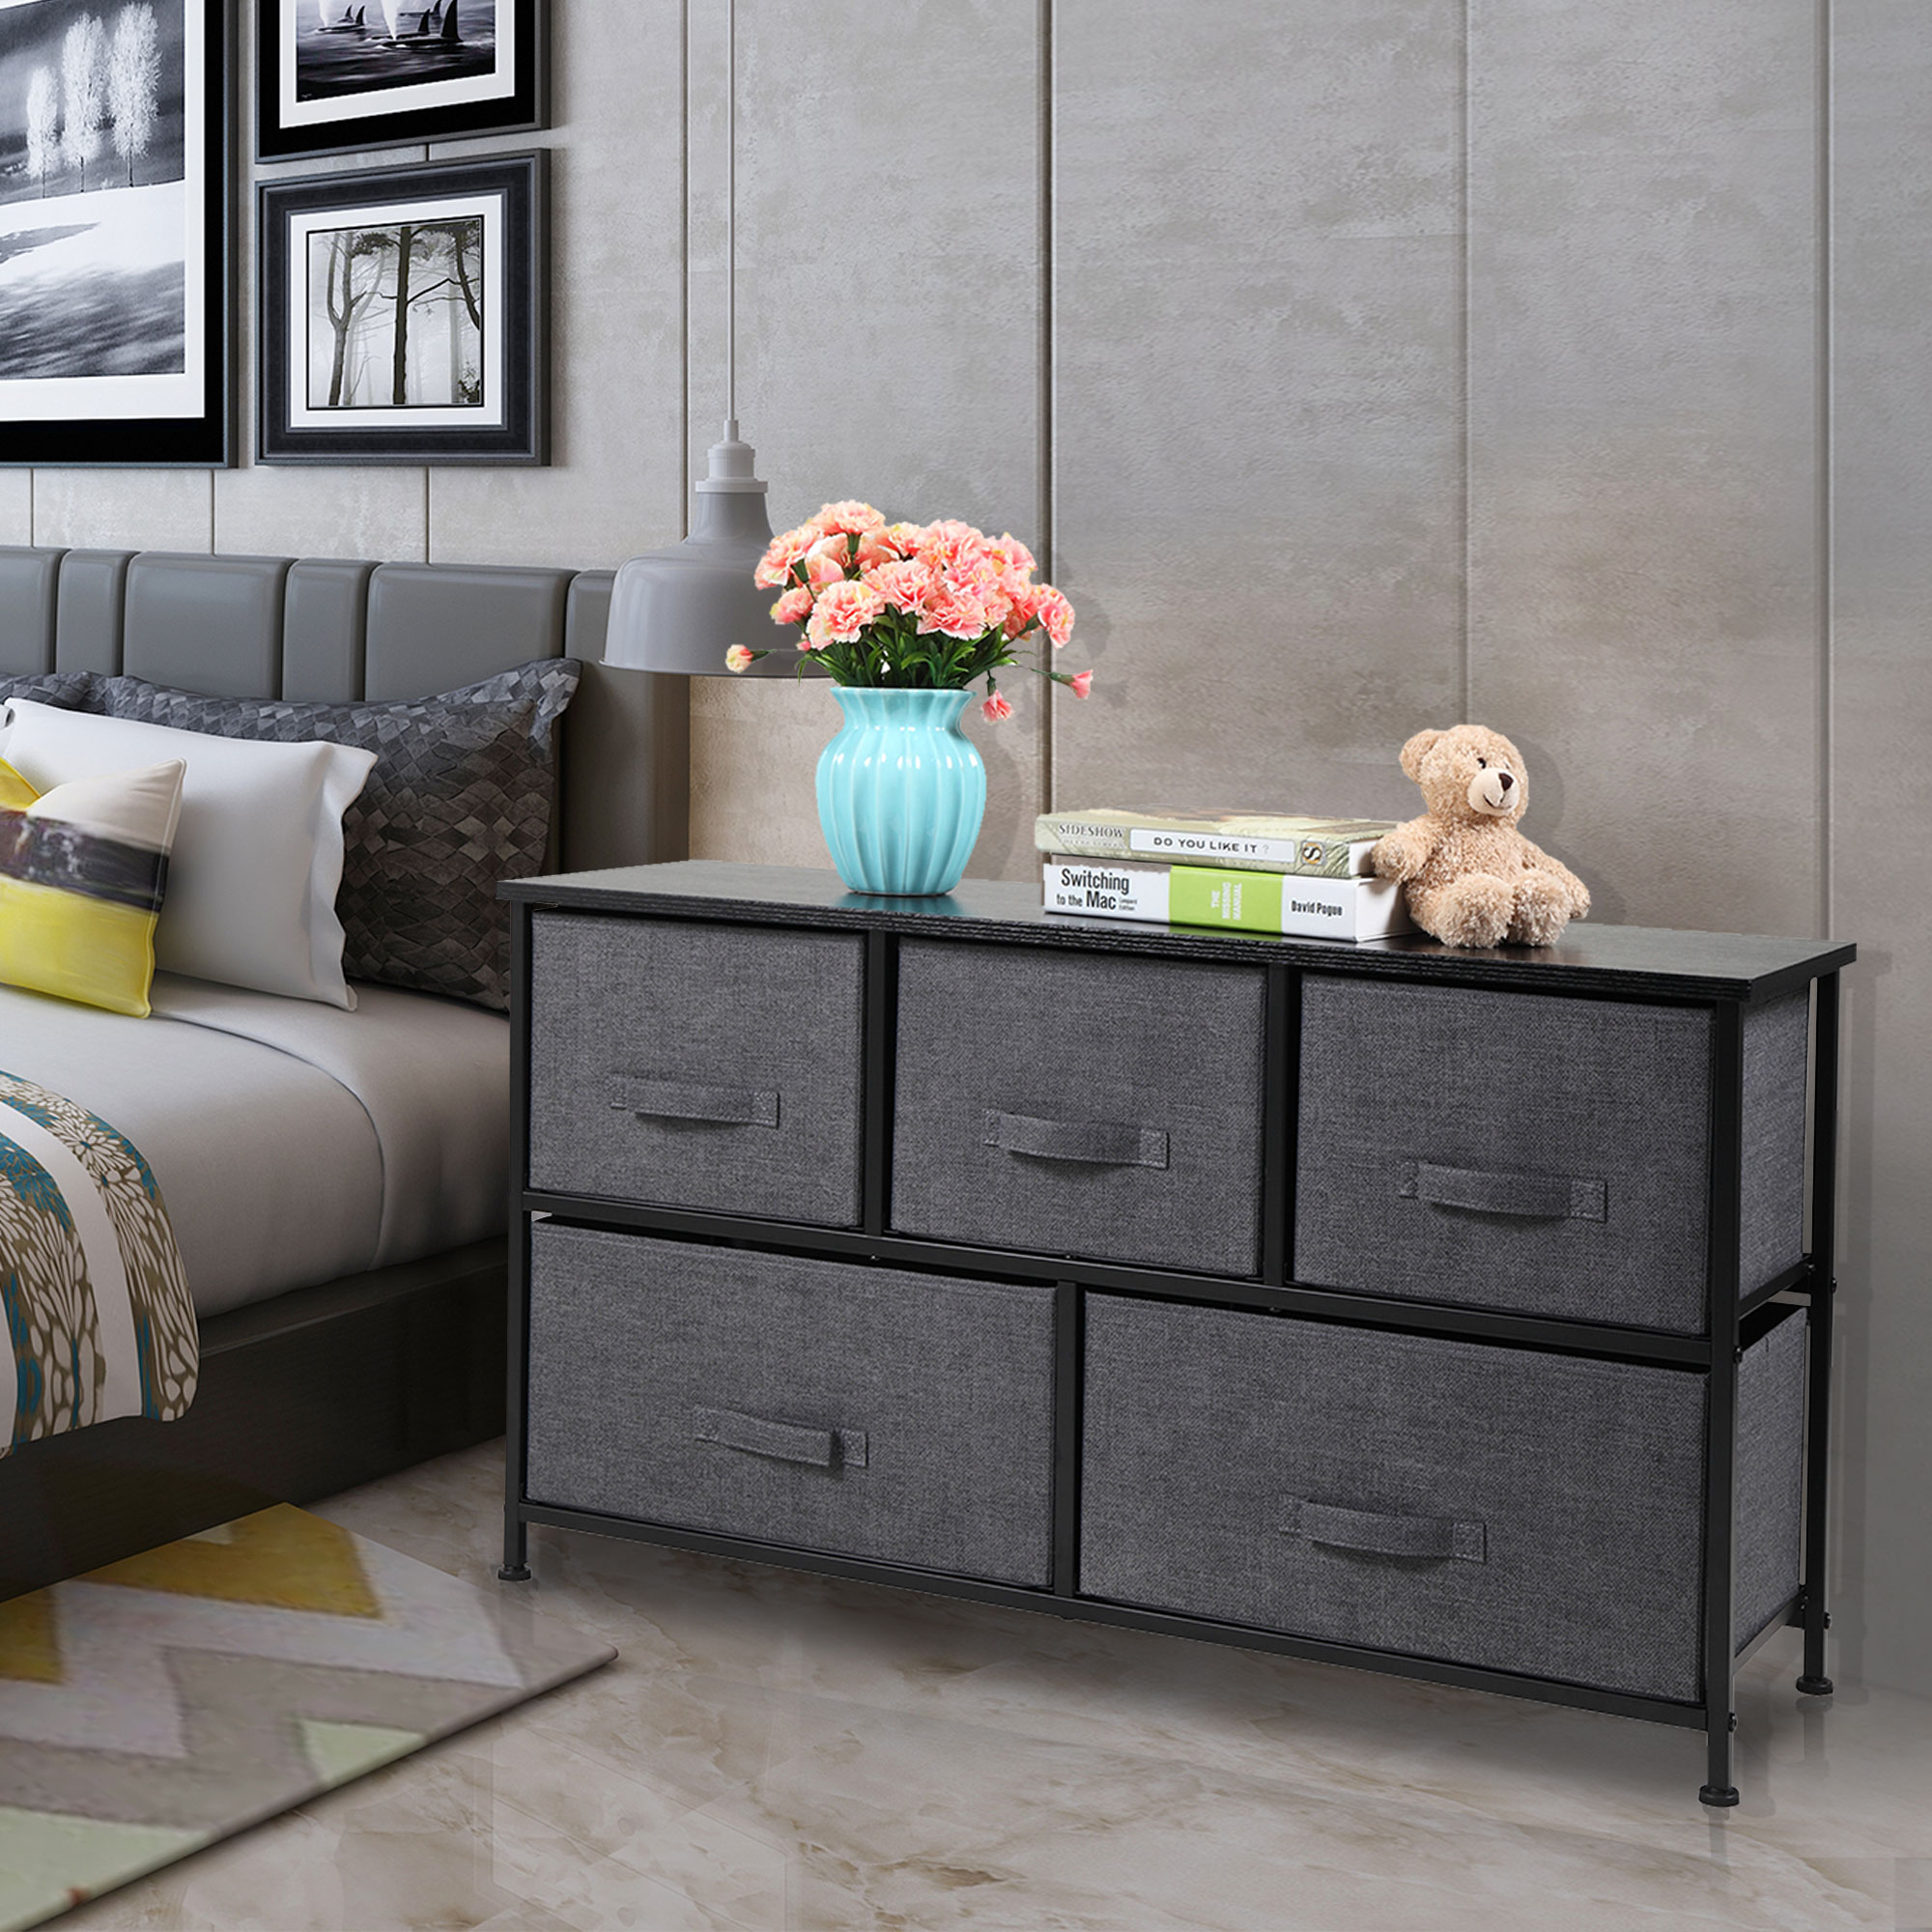 Simple and Modern Storage Chest with 5 Fabric Drawers with a Metal Frame, Living Room Bedroom Furniture - Black-Boyel Living